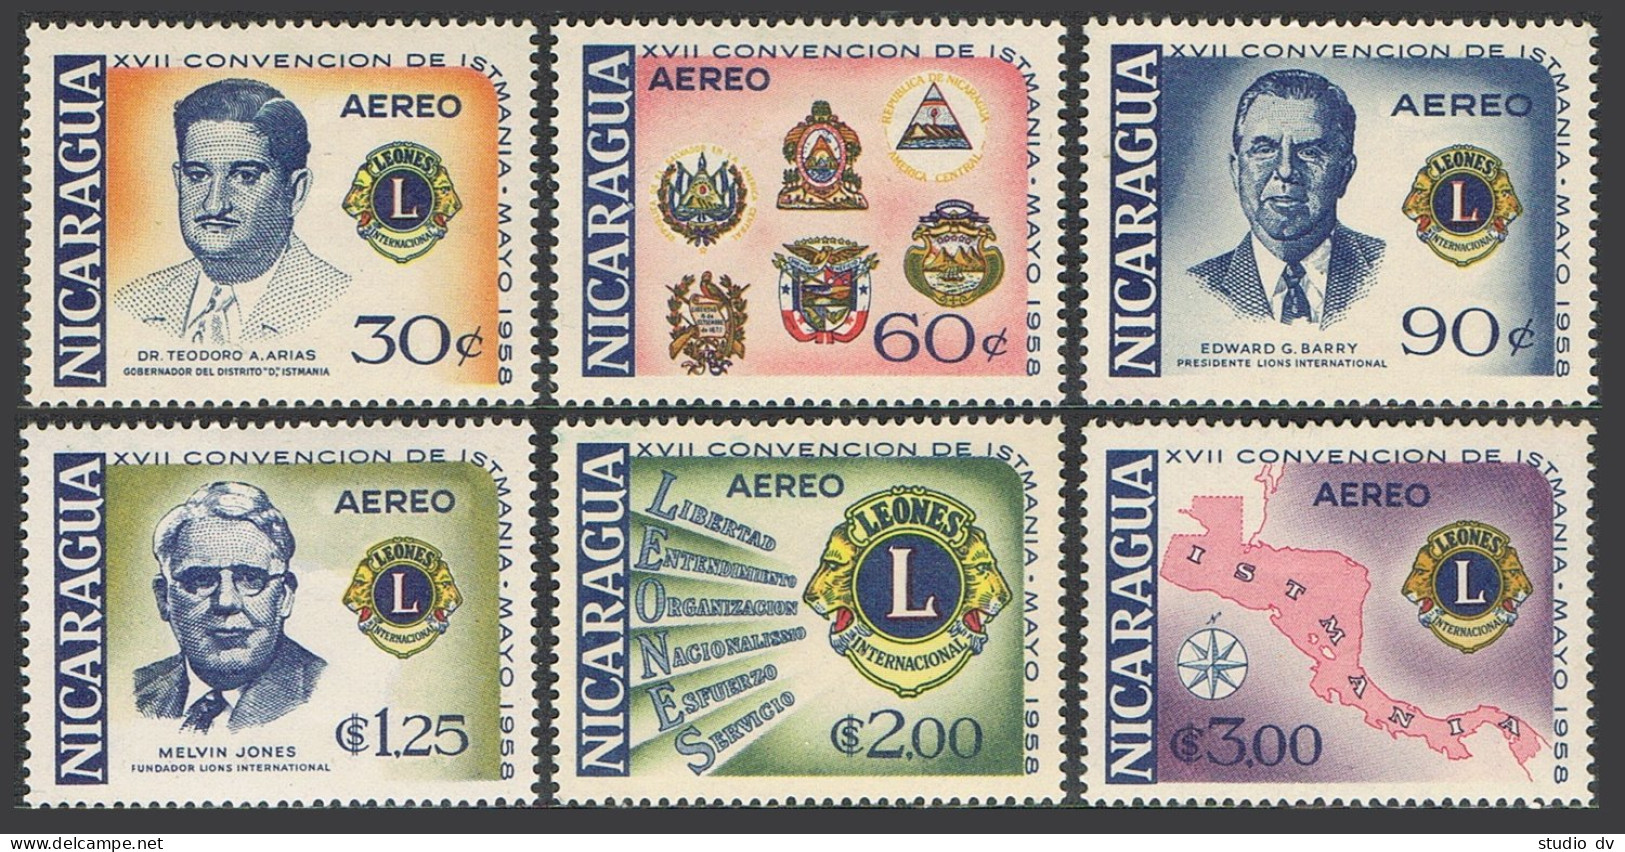 Nicaragua C410-C415, Lightly Hinged. Michel 1187-1192. Convention Of Lions,1958. - Nicaragua